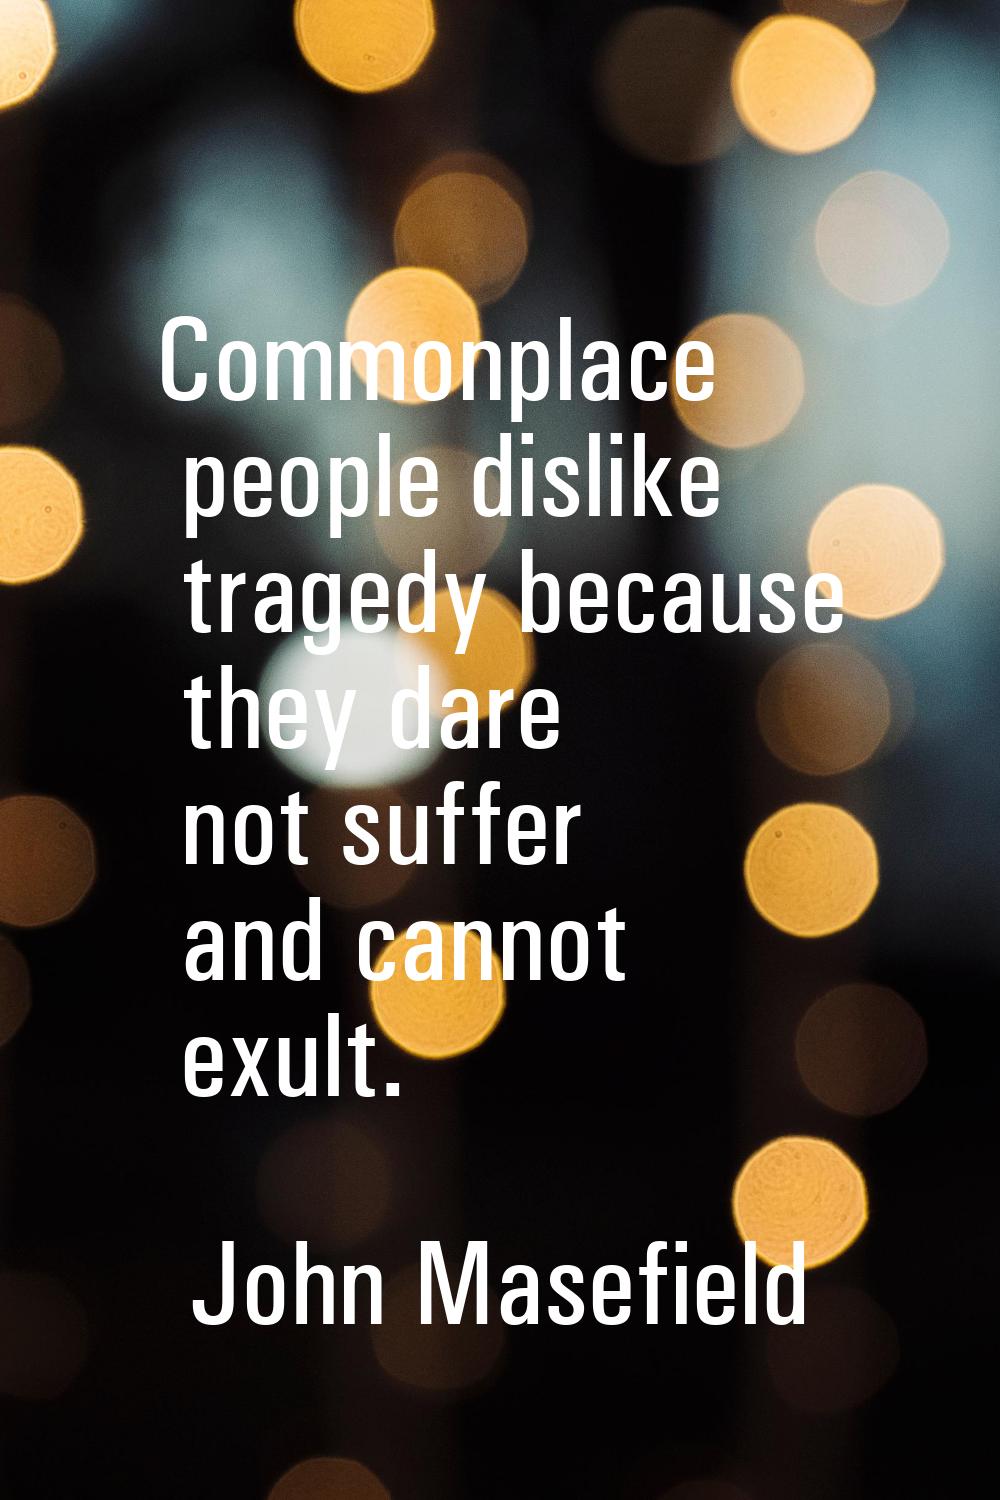 Commonplace people dislike tragedy because they dare not suffer and cannot exult.